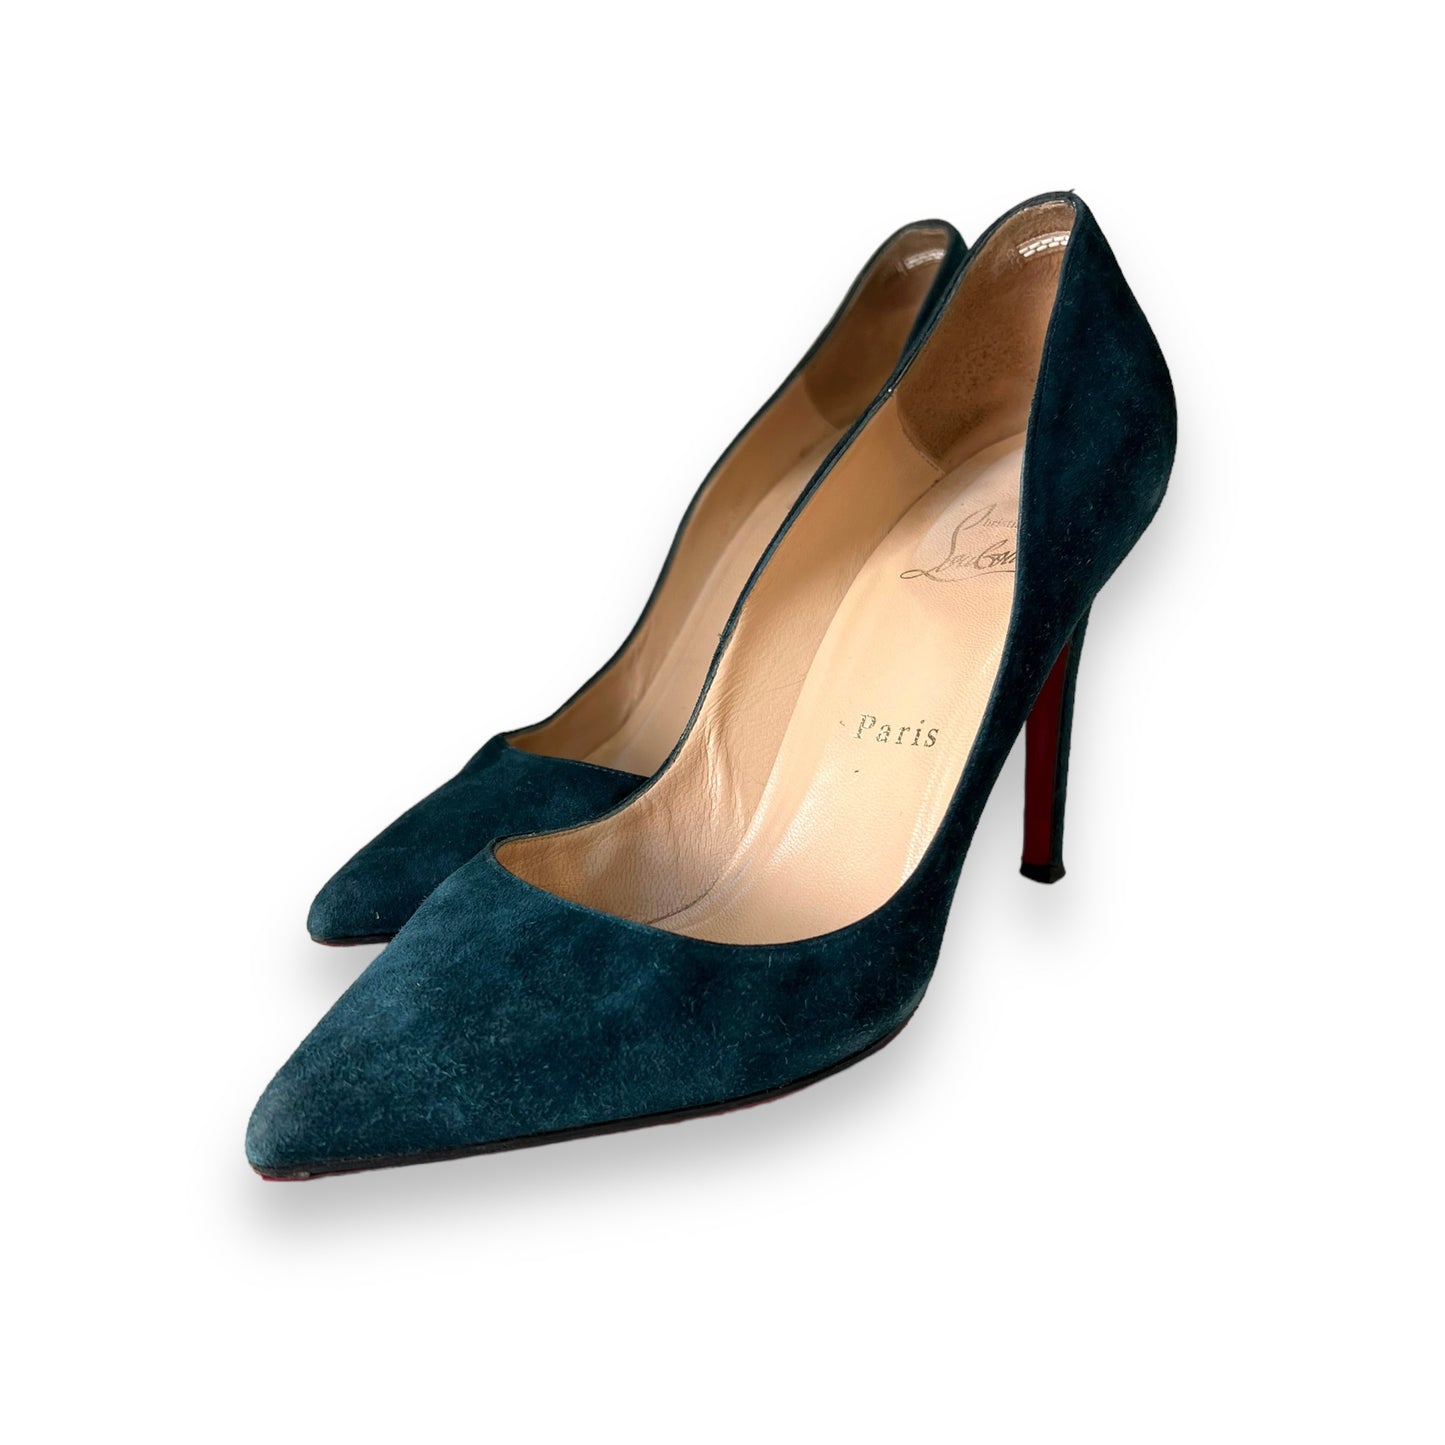 Christian Louboutin Pigalle 100 Suede Leather Pumps